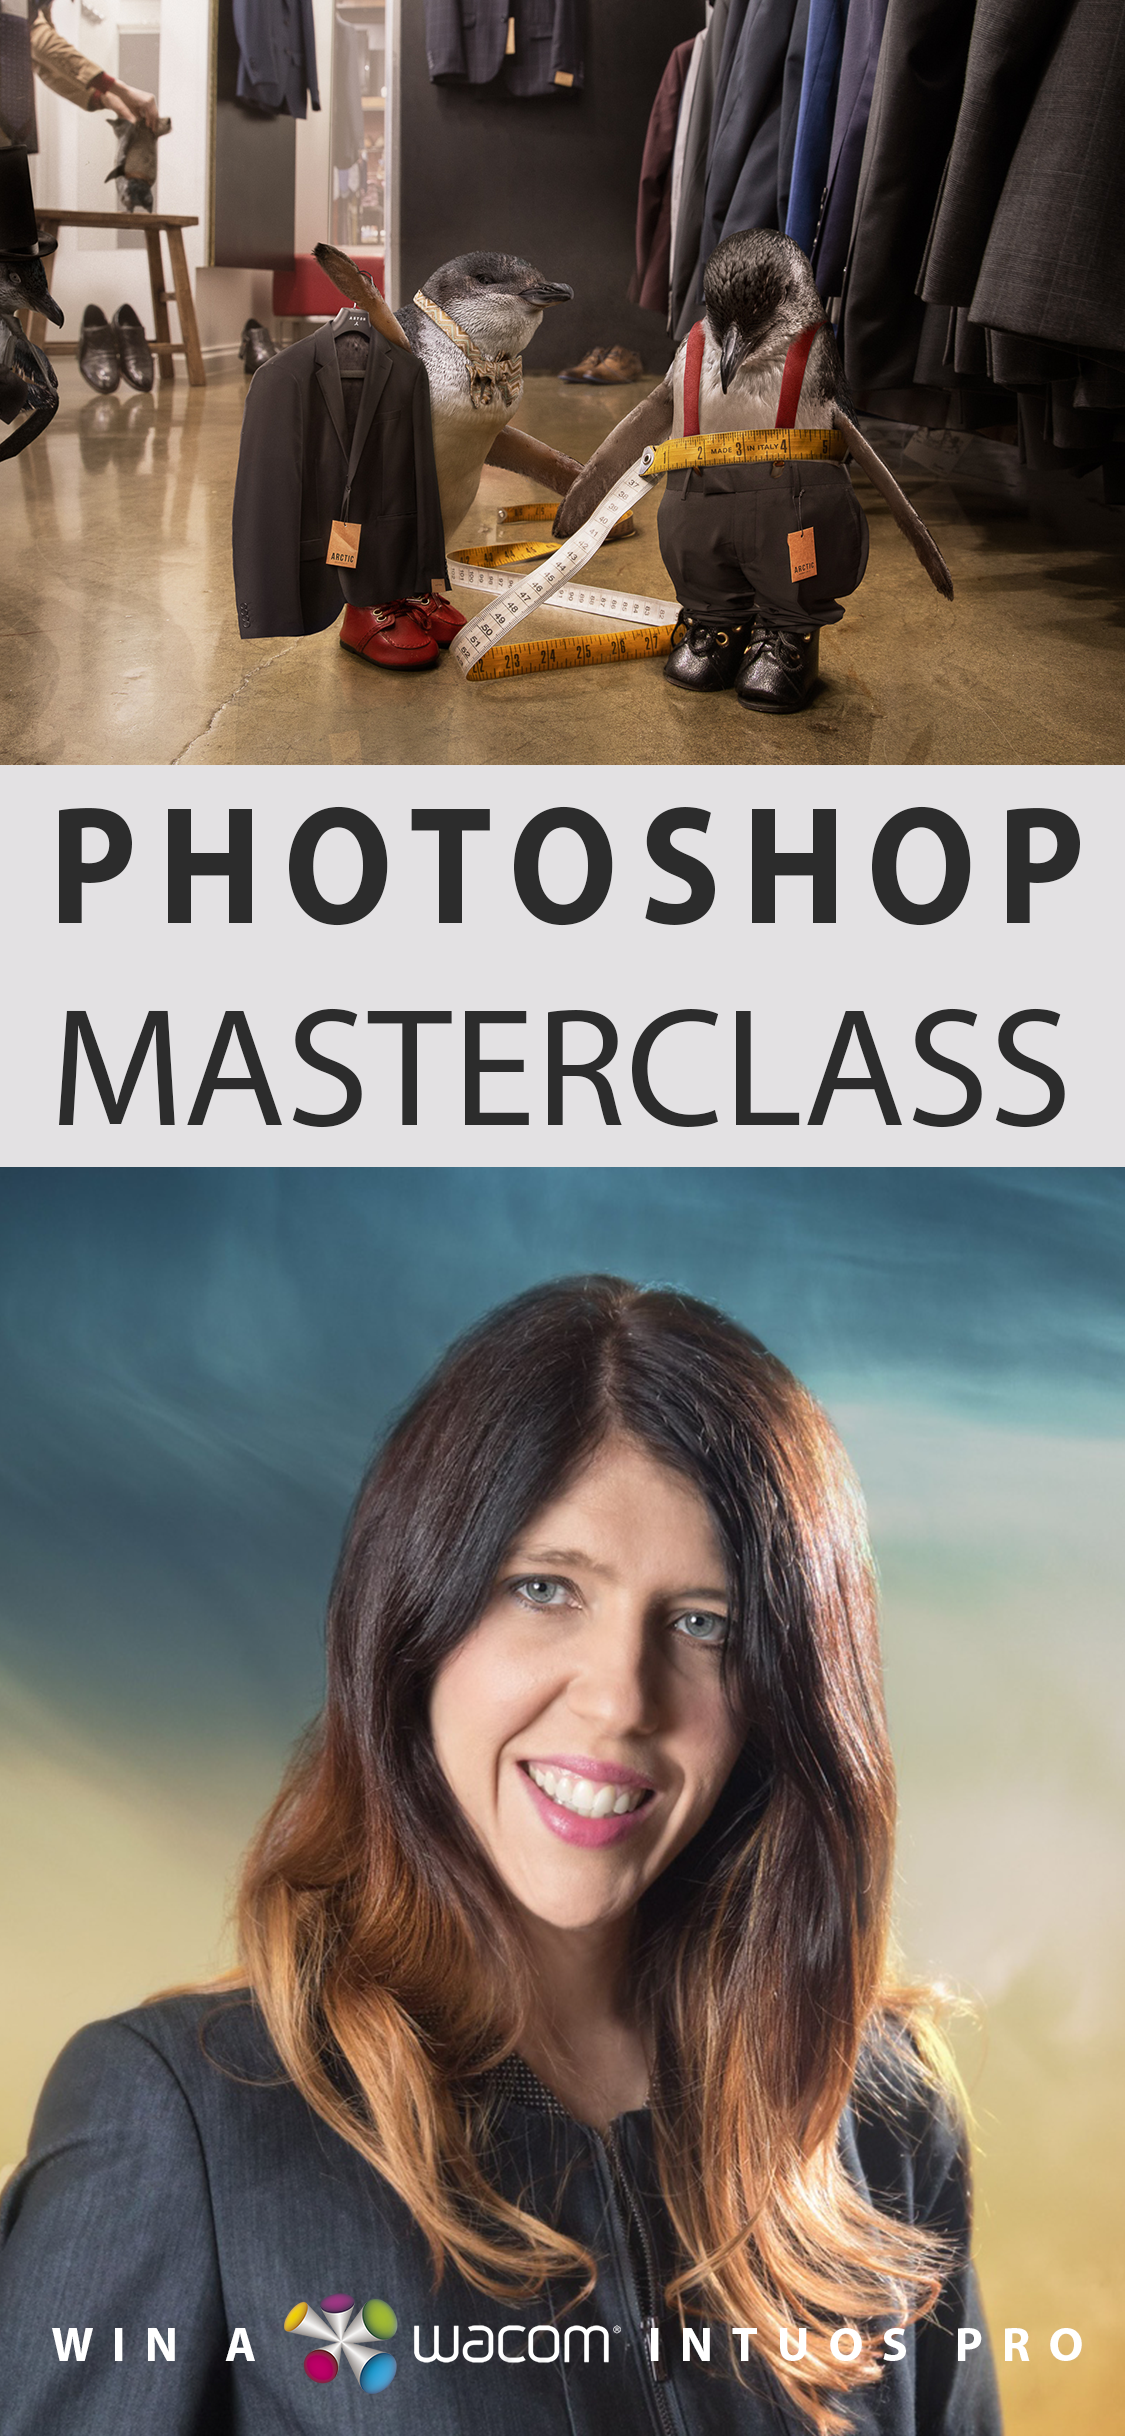 Join the Masterclass